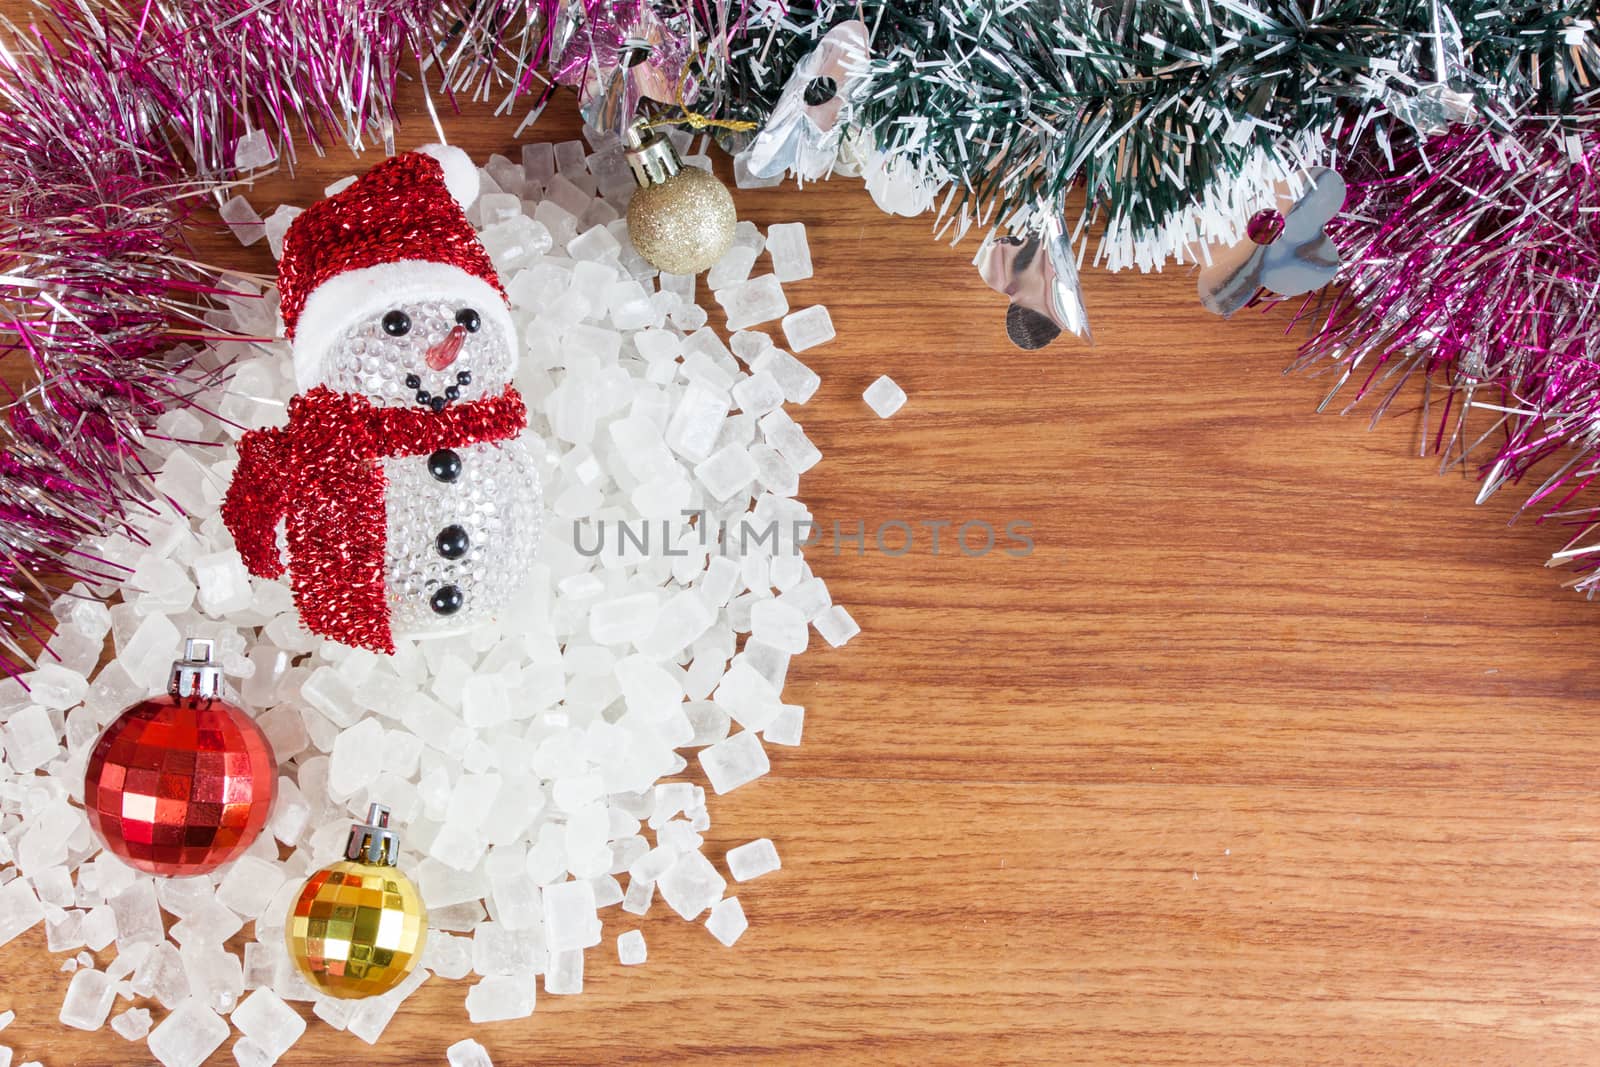 Snow Man on a pile of white crystalline with white background. Red and yellow Christmas Balls Ornaments on wood,